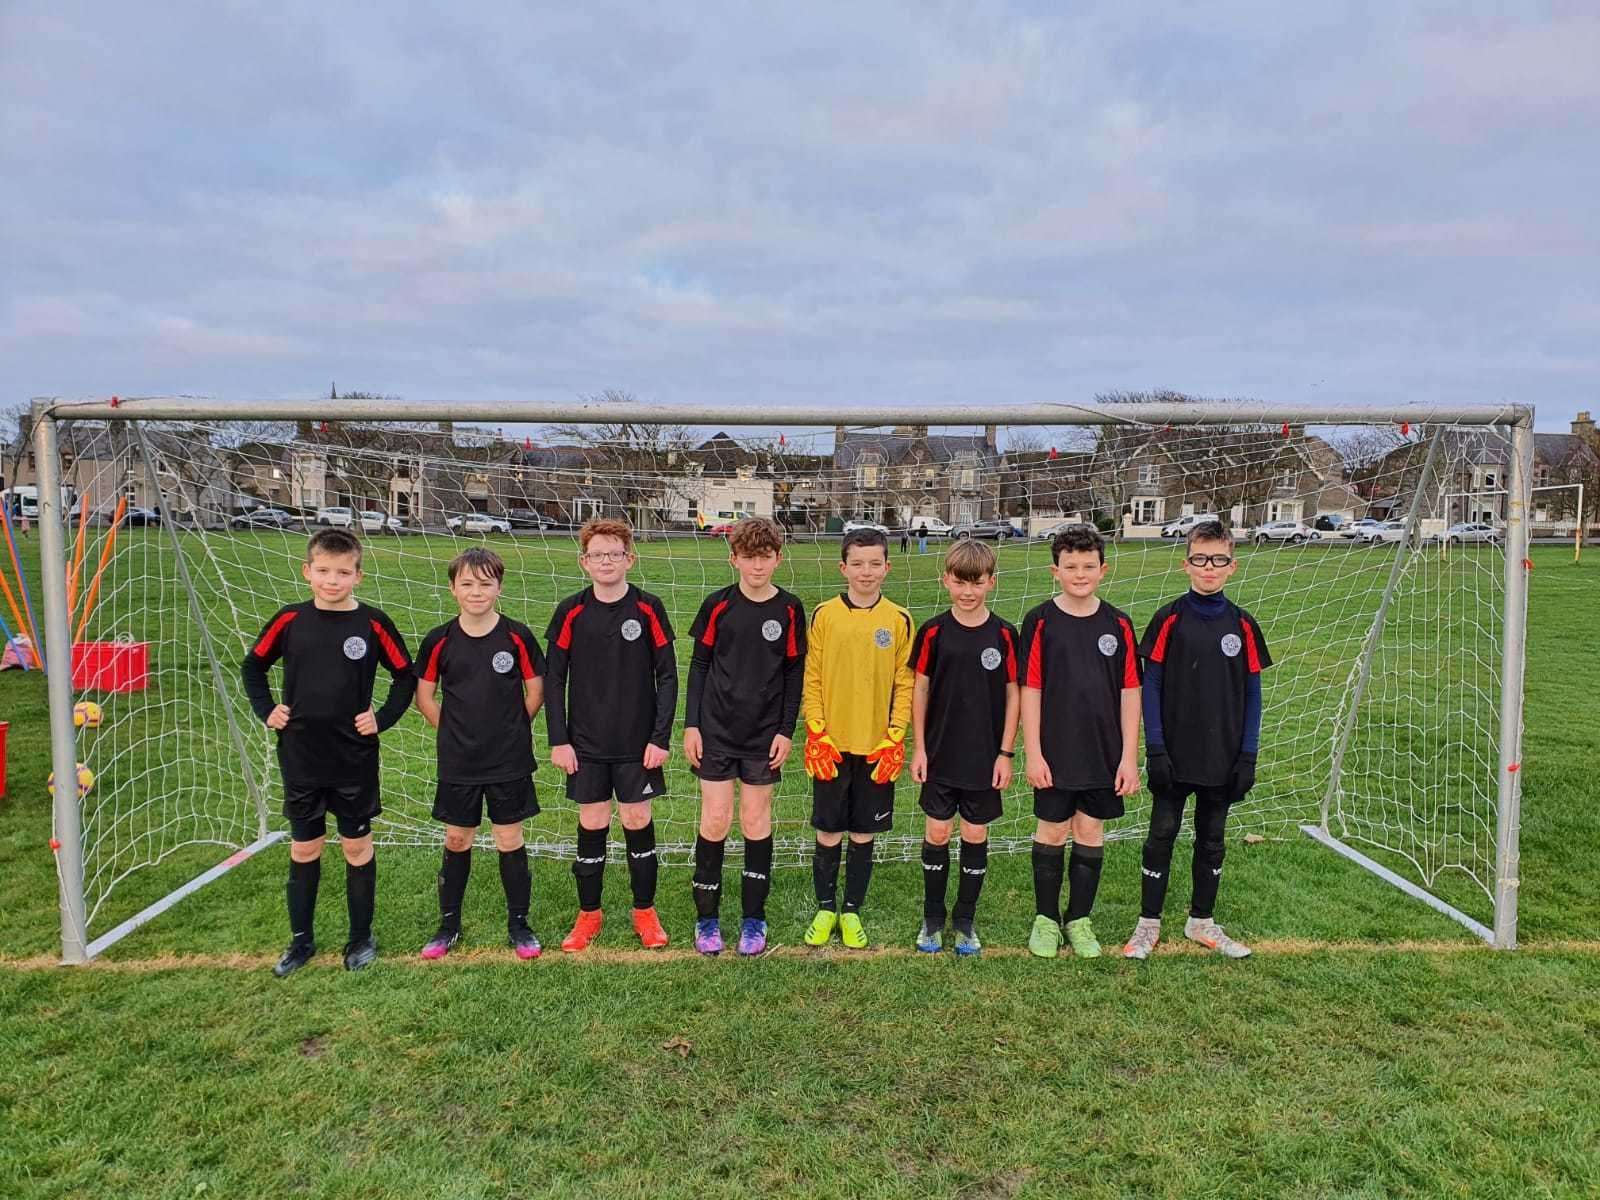 Caithness United Team 1 were winners in the U12 Moray Youth Development League Football Festival.